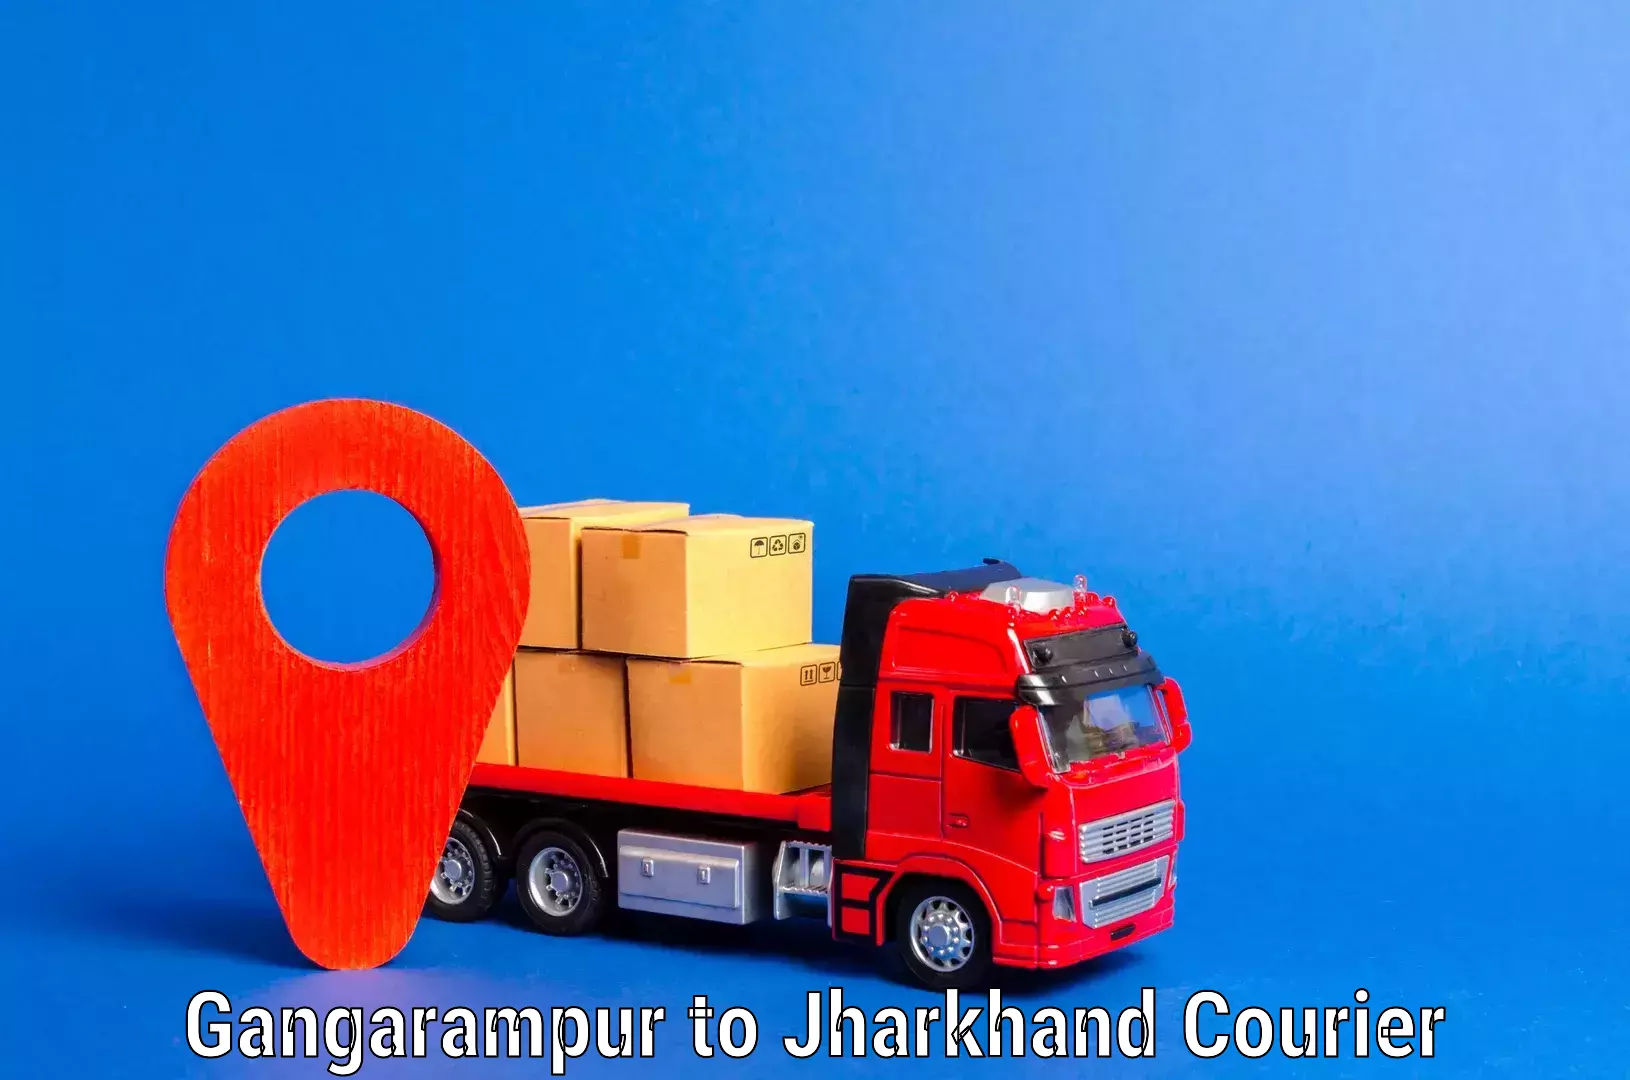 Home relocation experts Gangarampur to Jharkhand